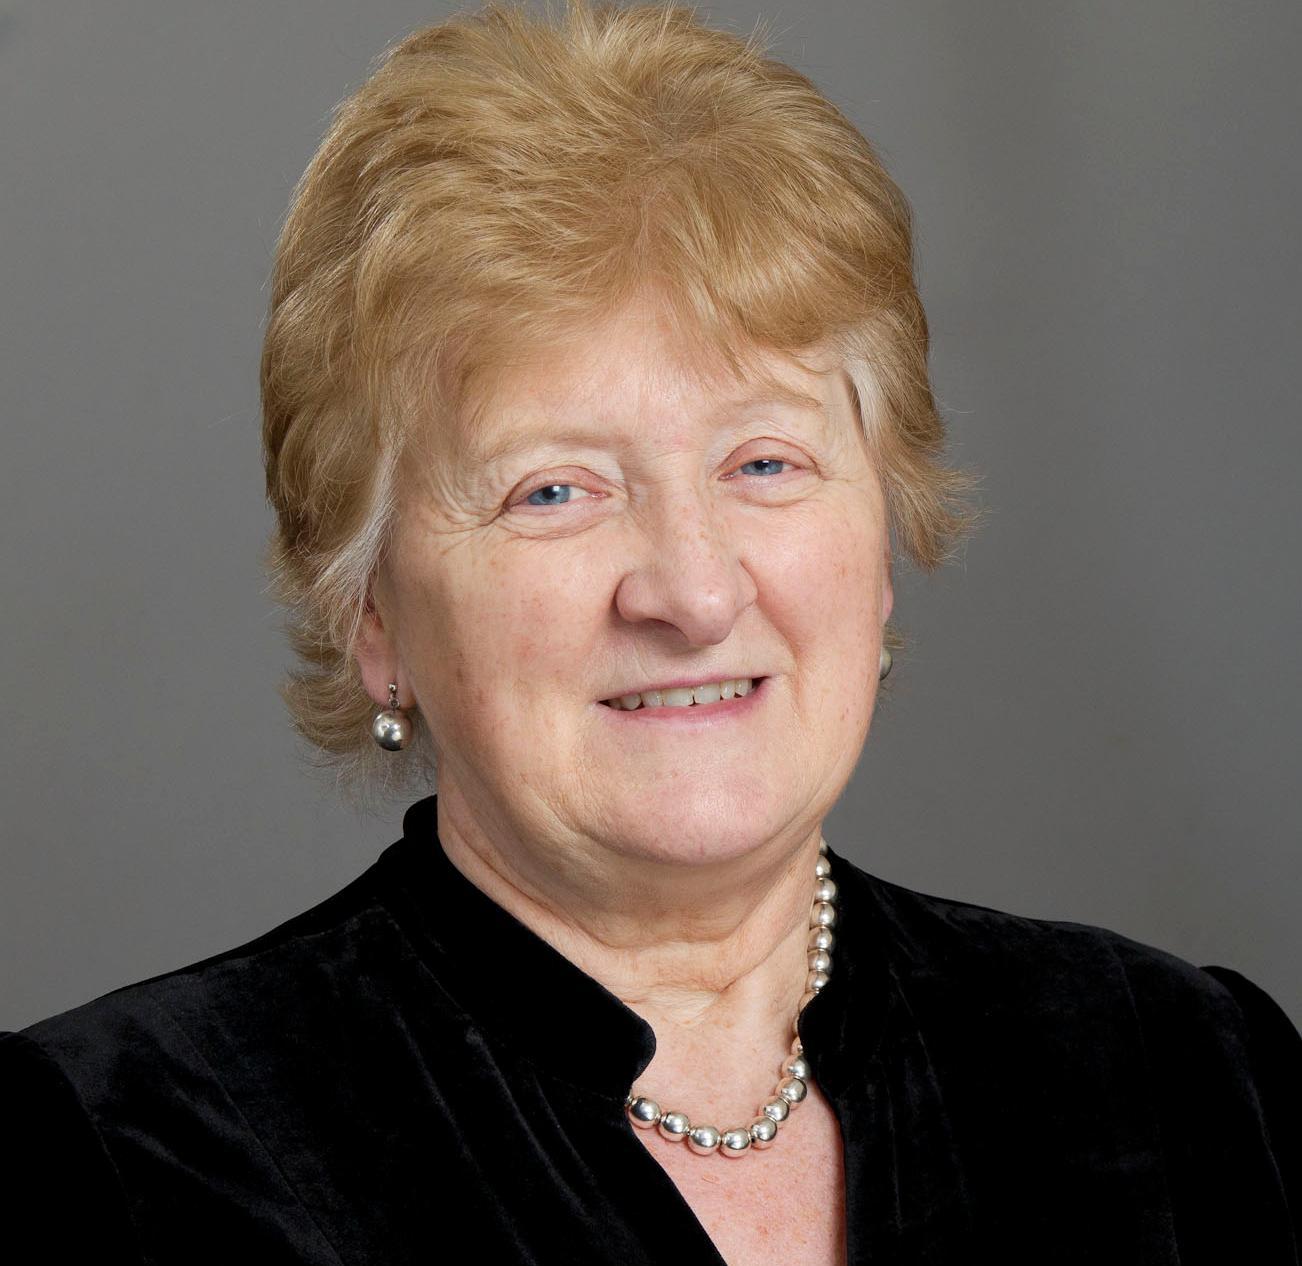 Professor Geraldine McCarthy appointed Chairperson of the South/South West Hospital Group